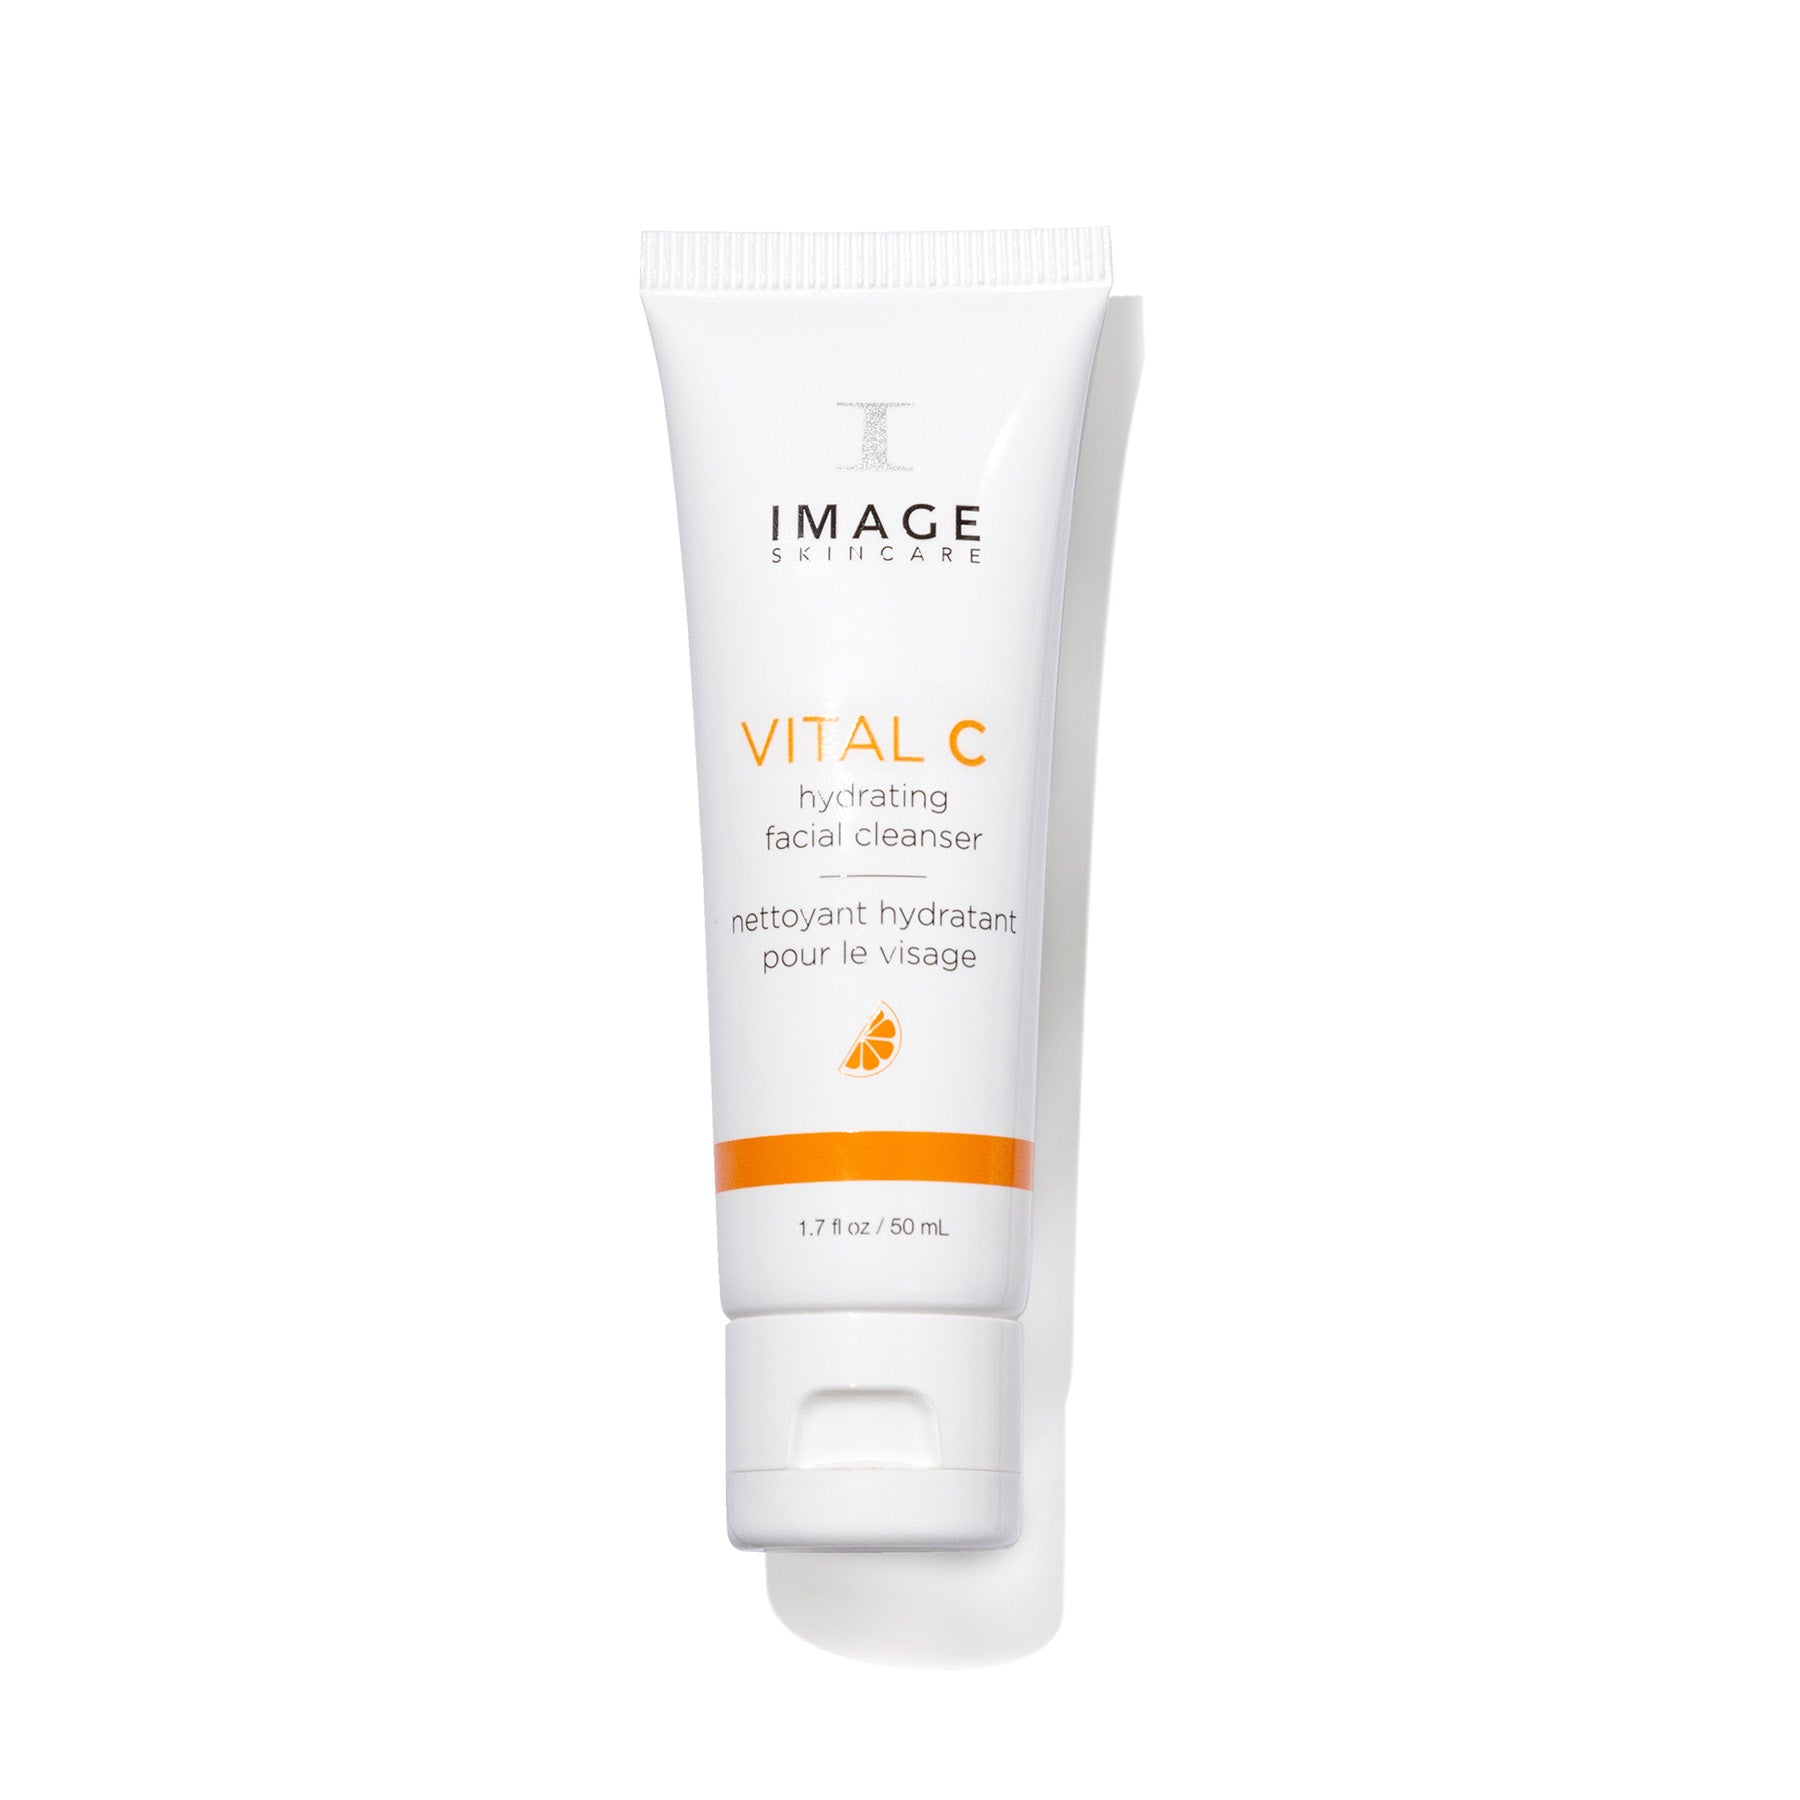 Vital C hydrating facial cleanser discovery-size